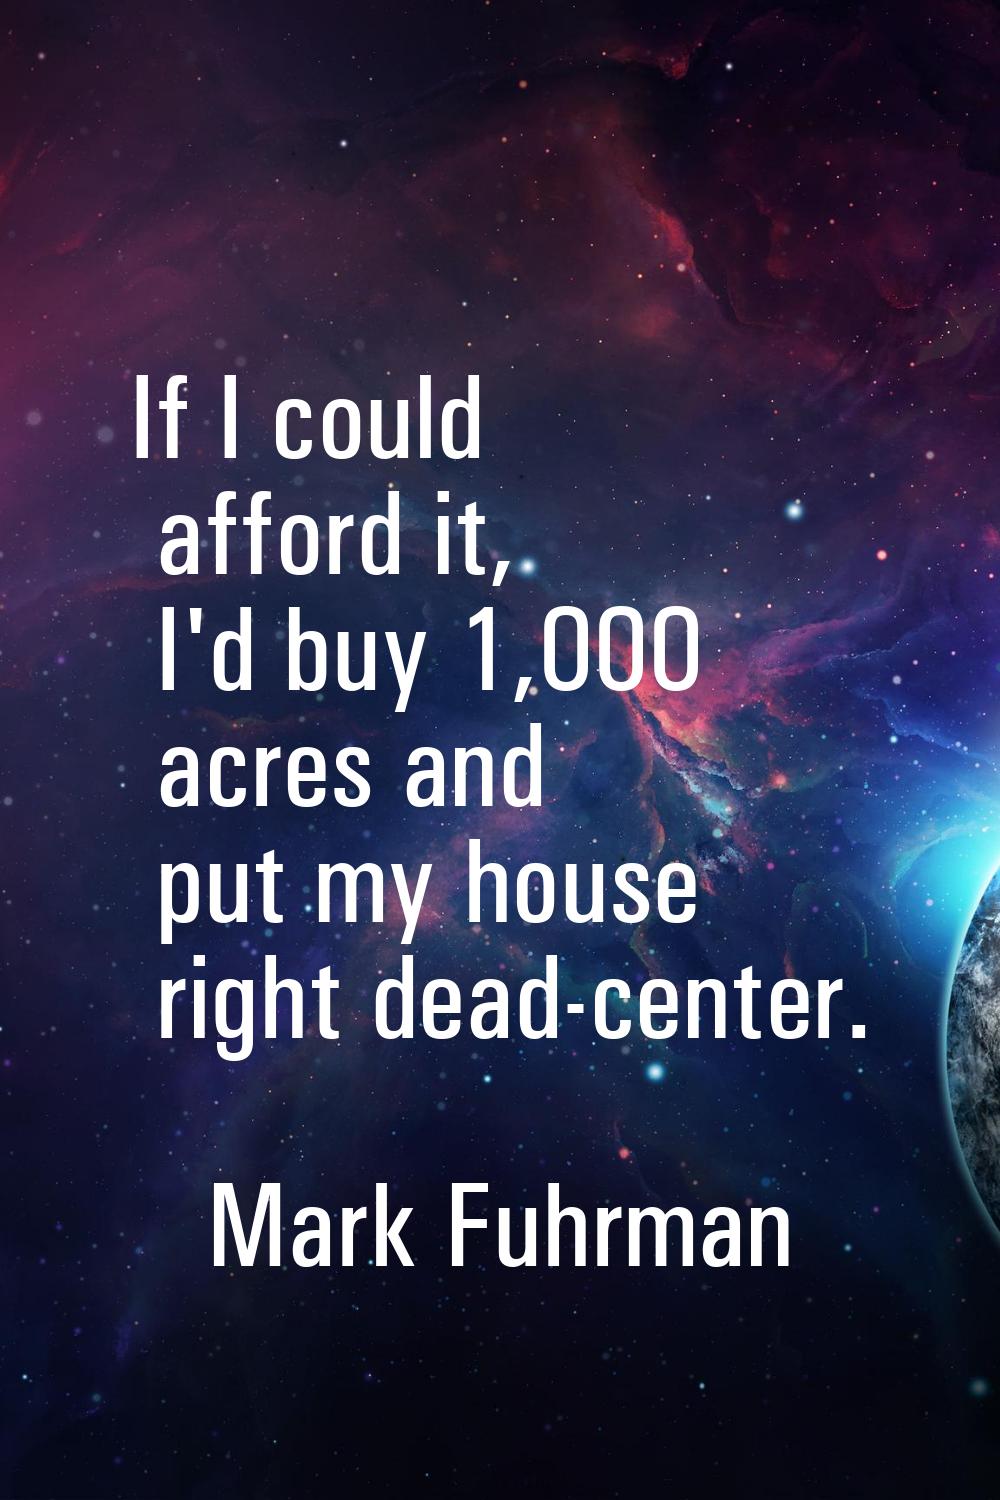 If I could afford it, I'd buy 1,000 acres and put my house right dead-center.